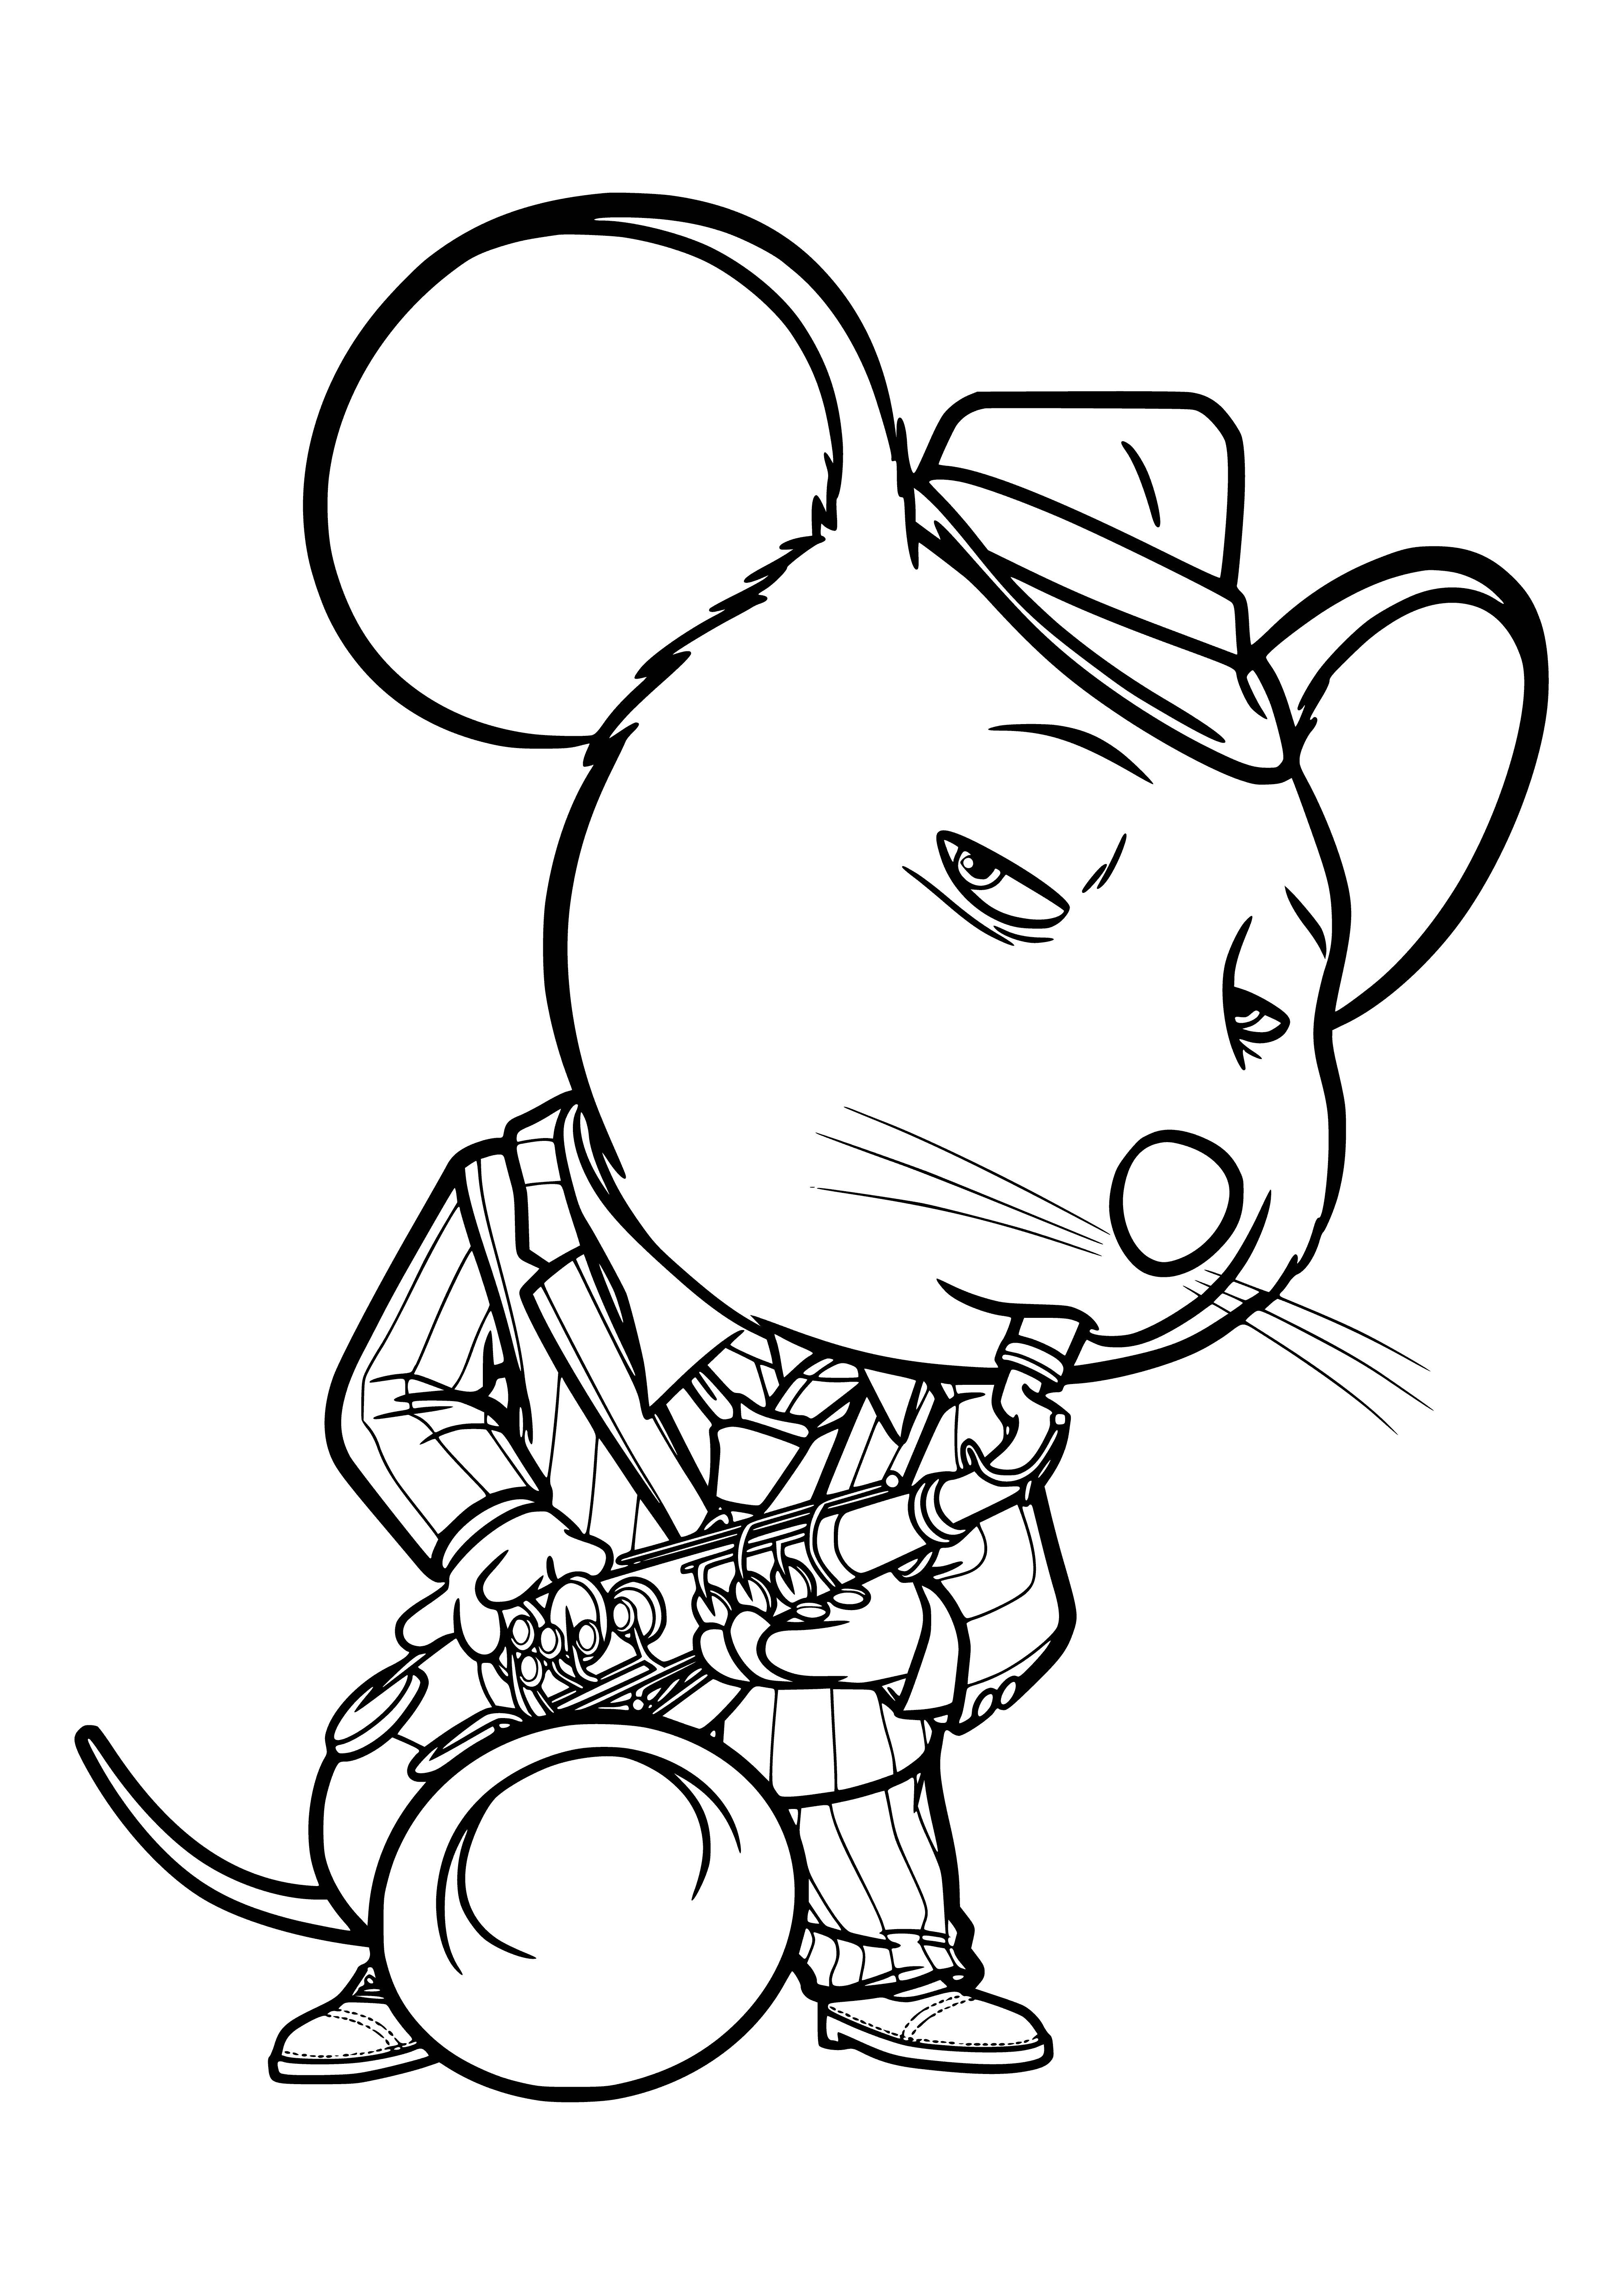 coloring page: Mouse in center of page holds mic, standing on hind legs with black fur & long tail, looks happy.